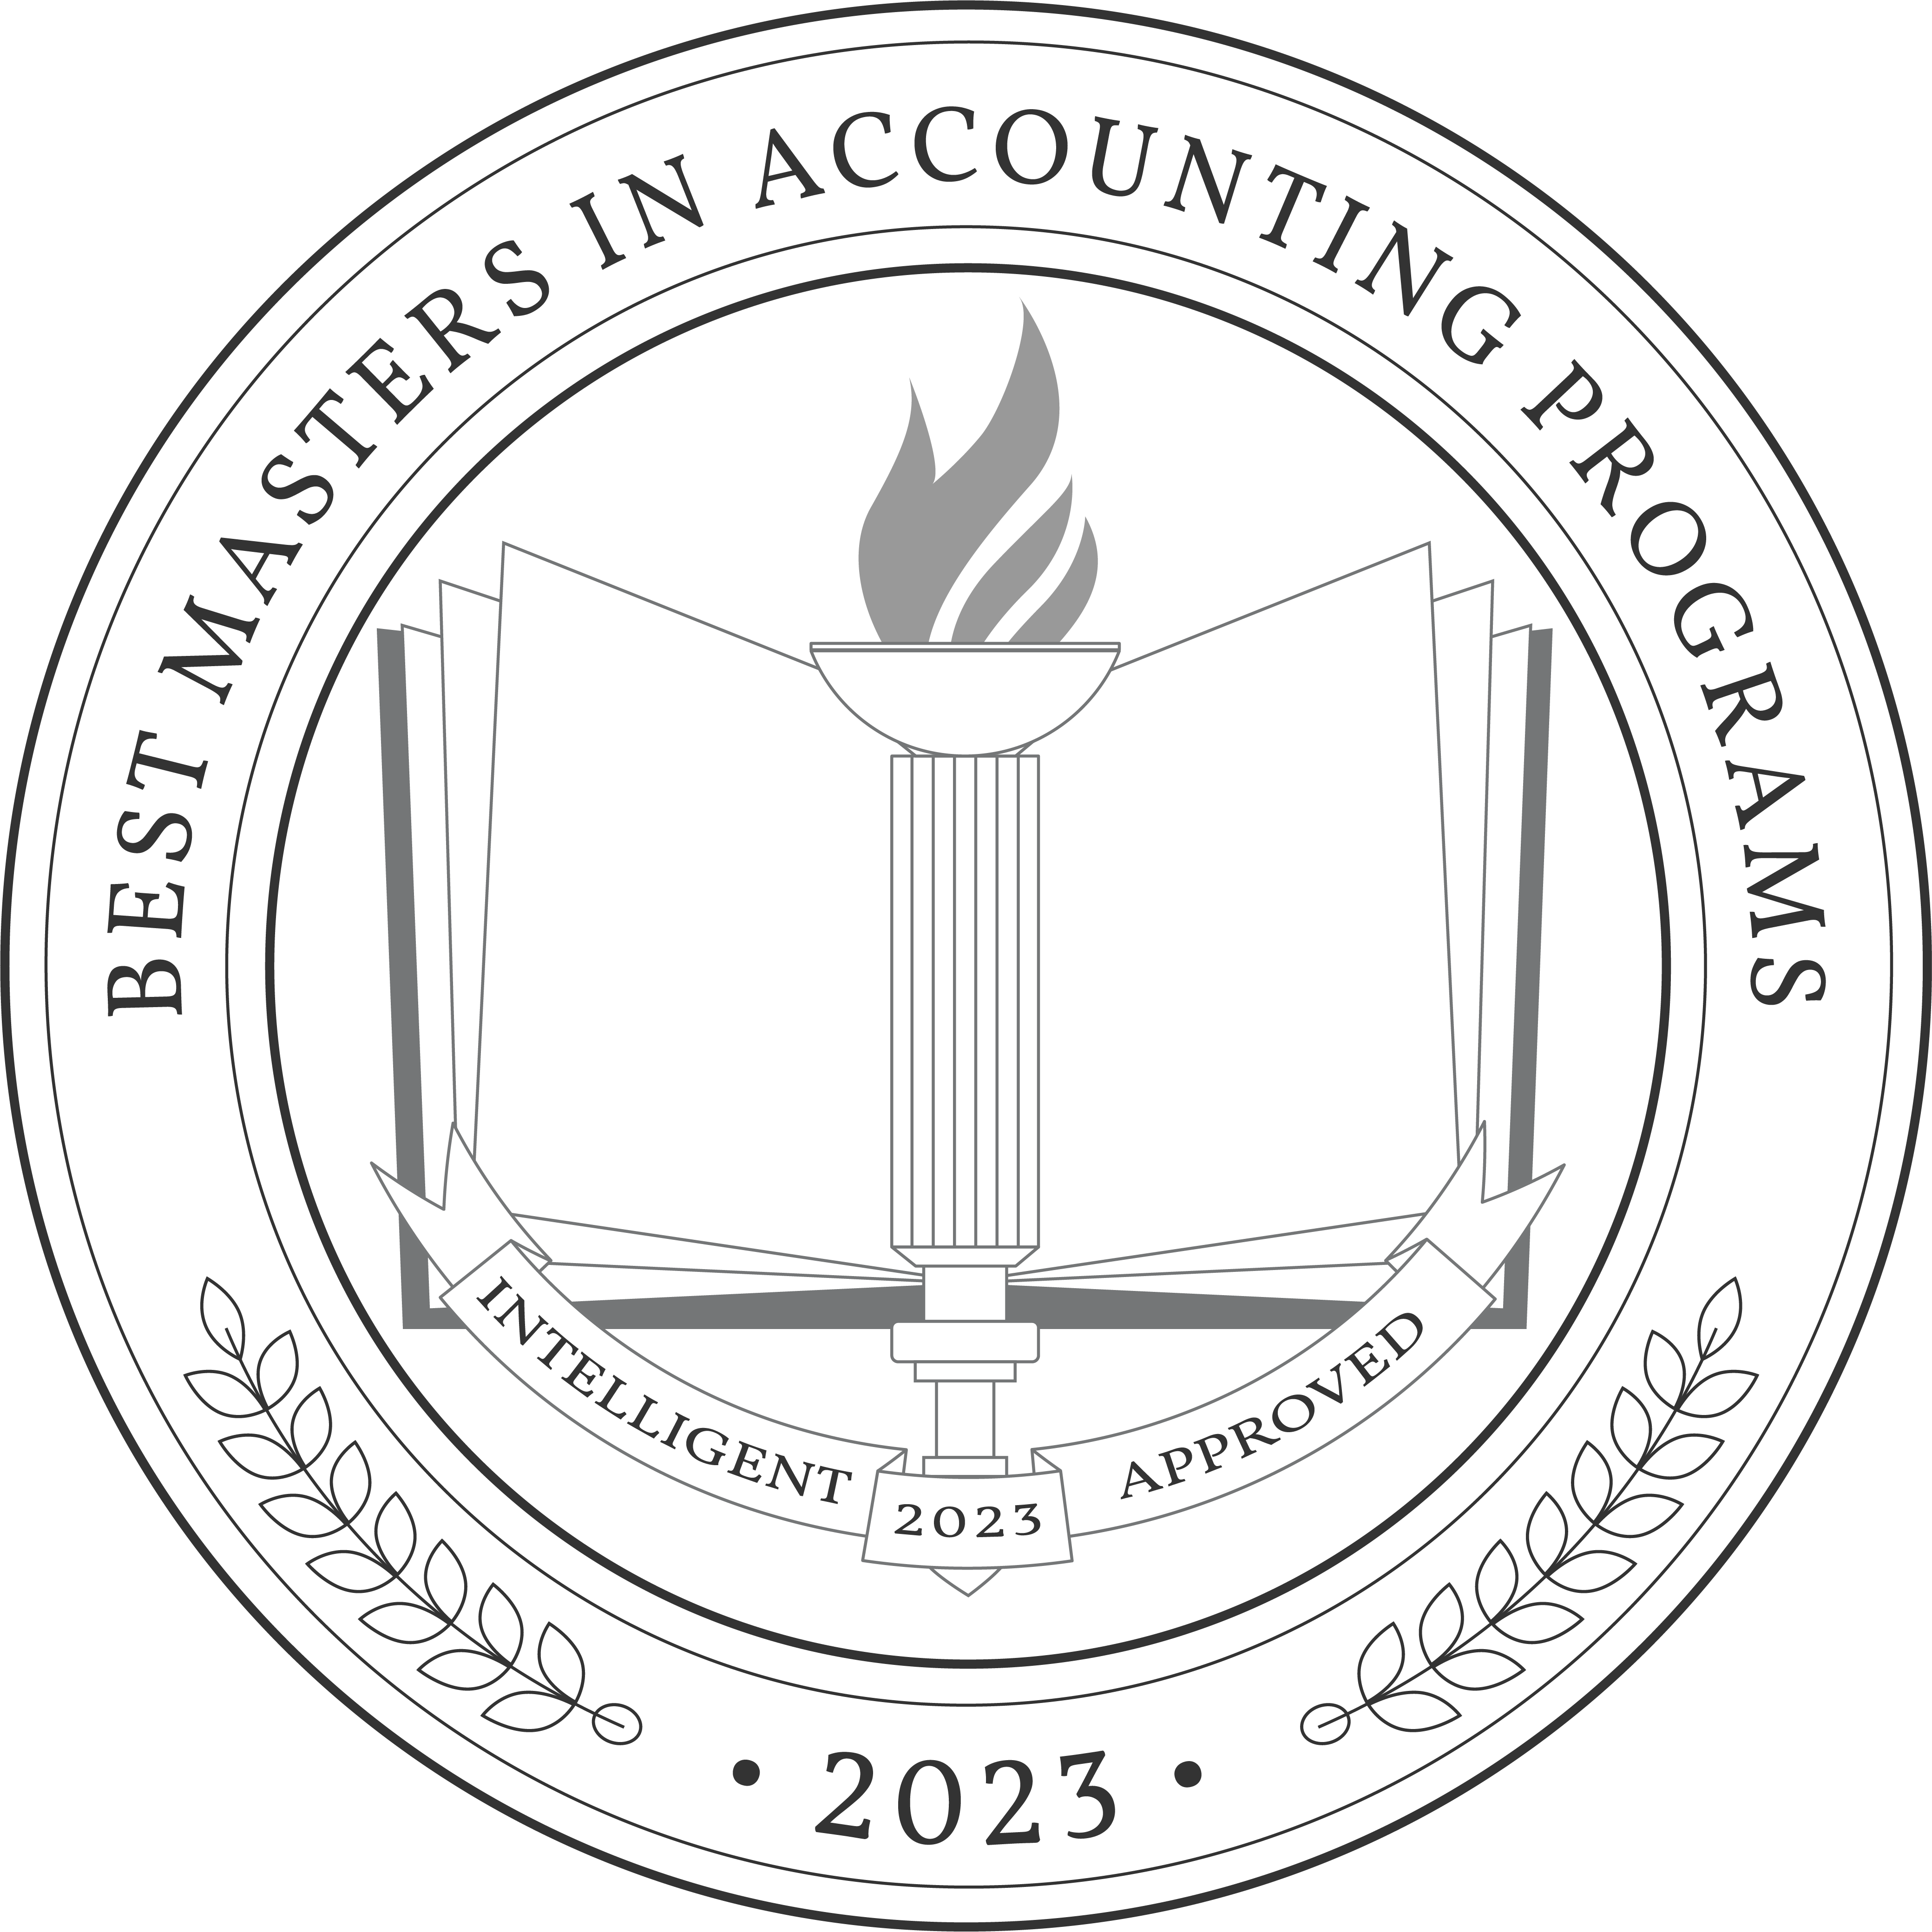 Best Master’s in Accounting Programs 2023